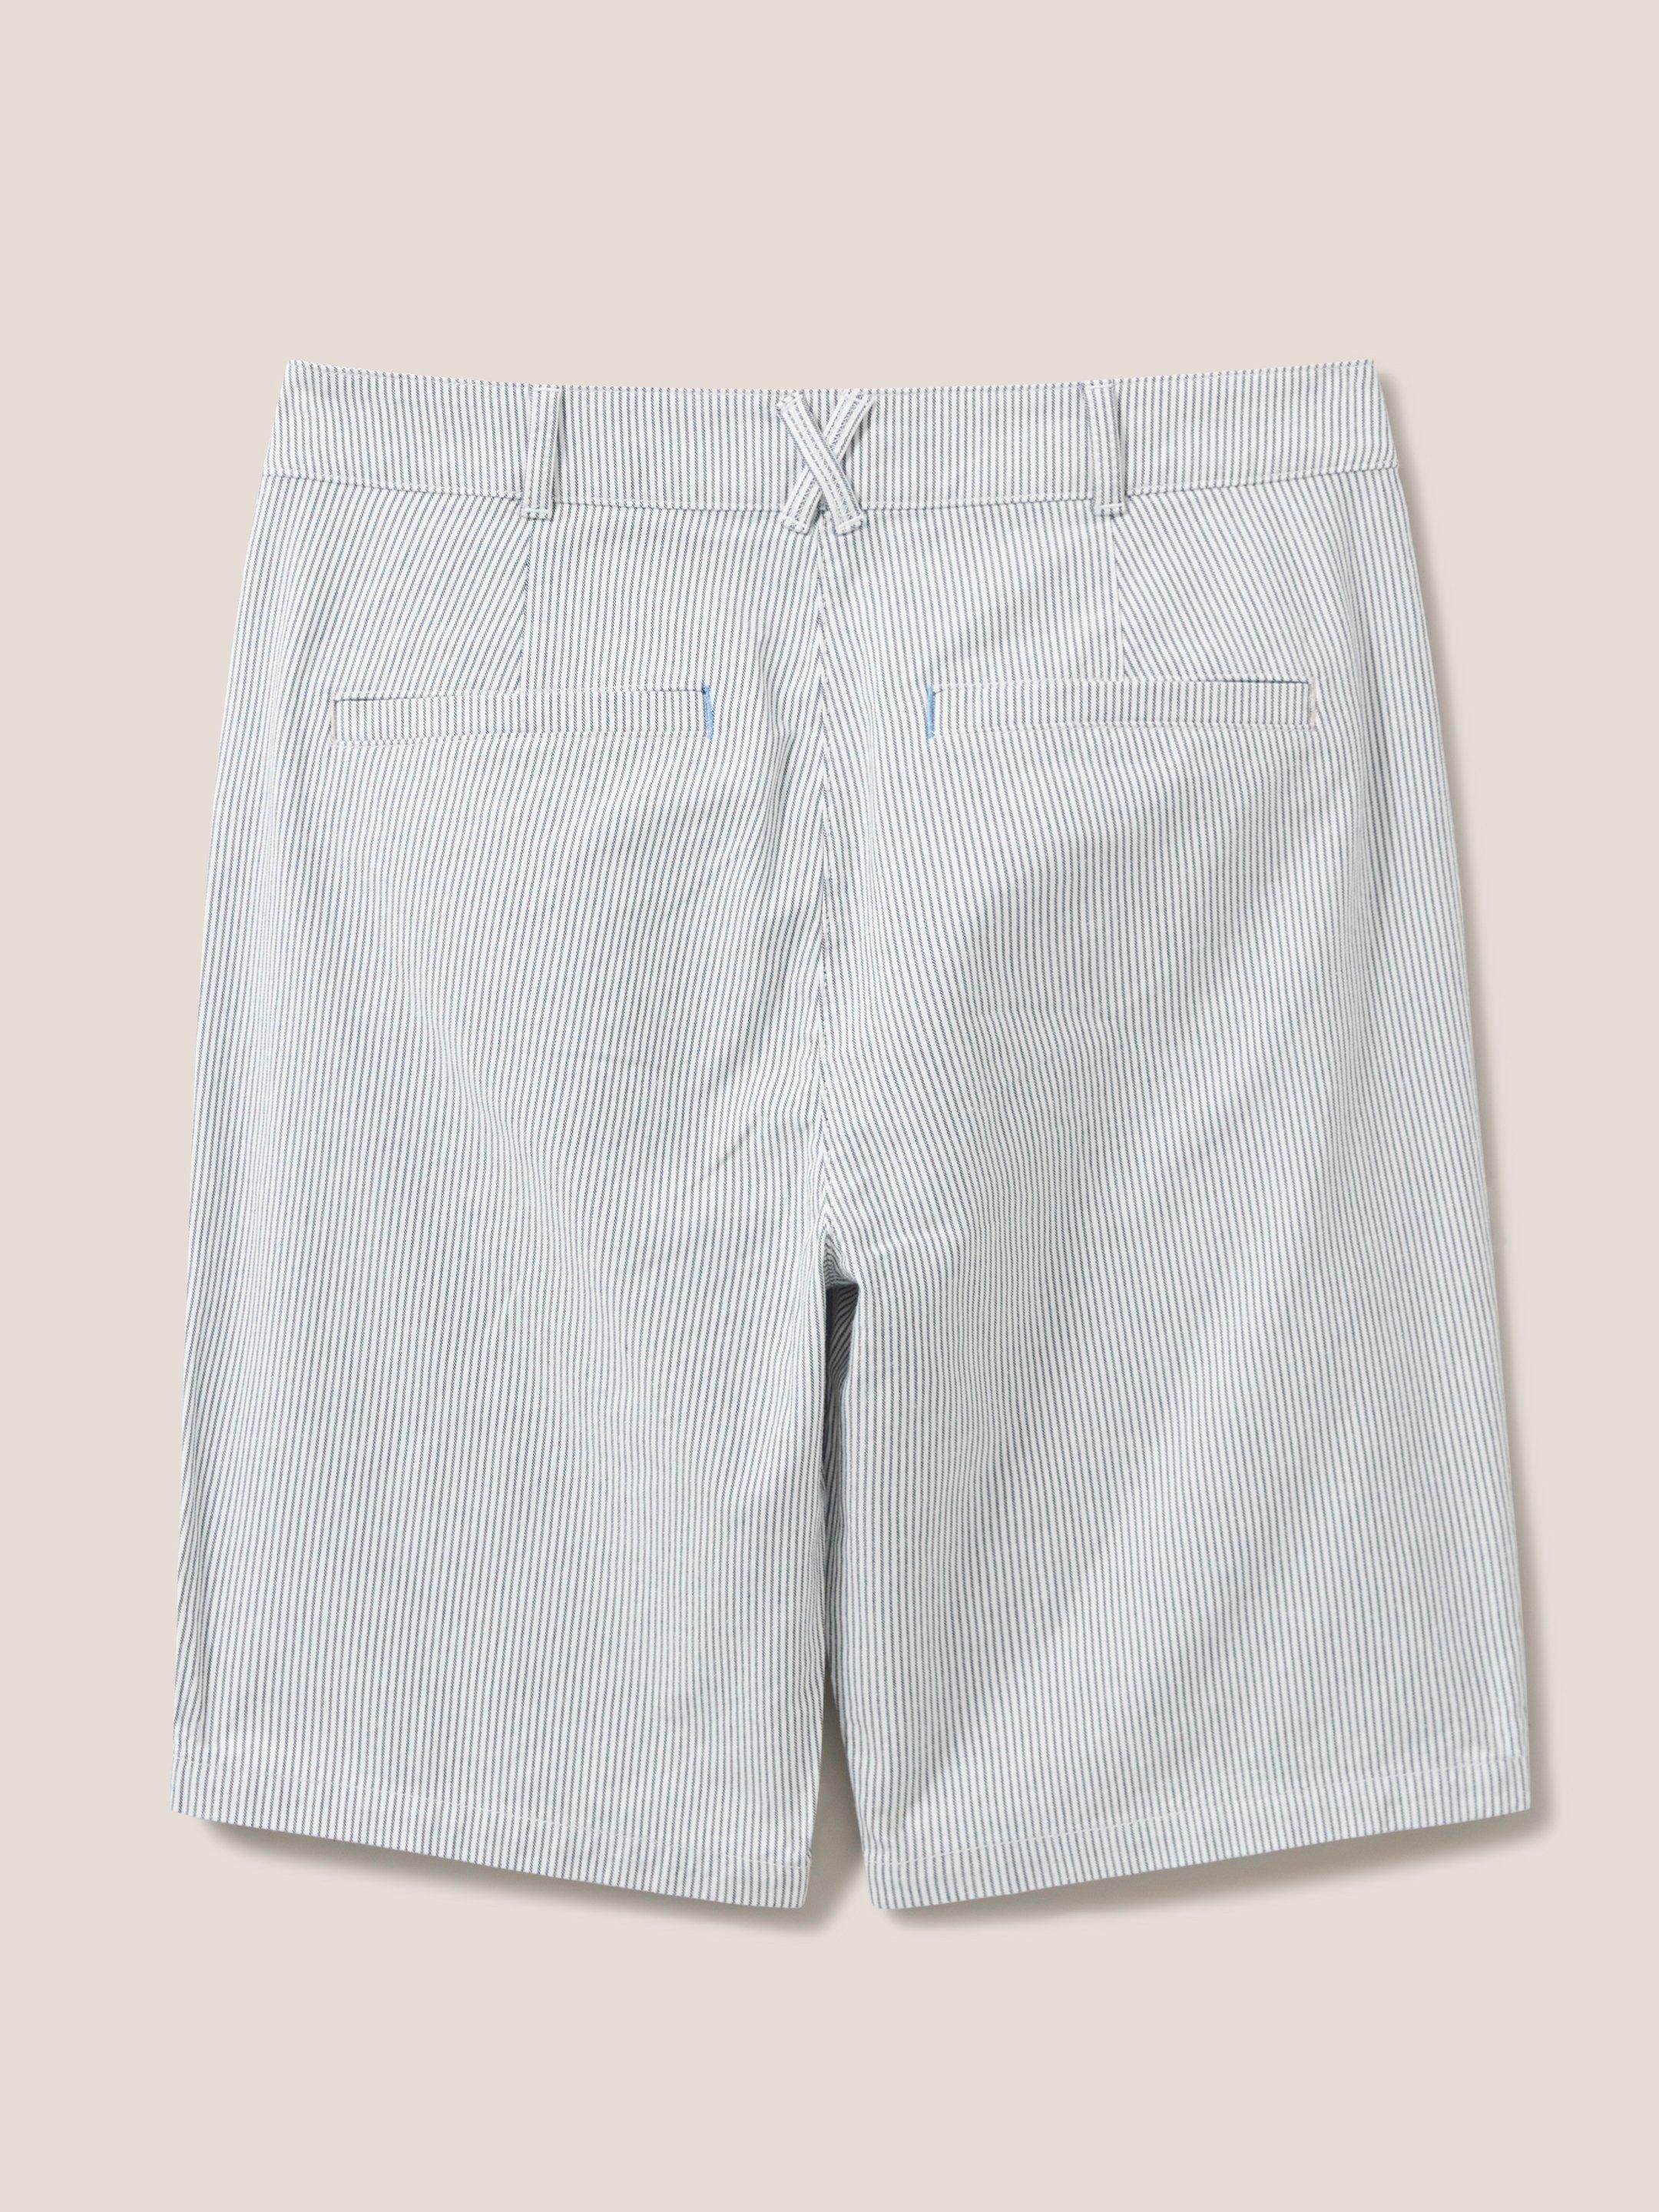 Twister Chino Short in IVORY MLT - FLAT BACK